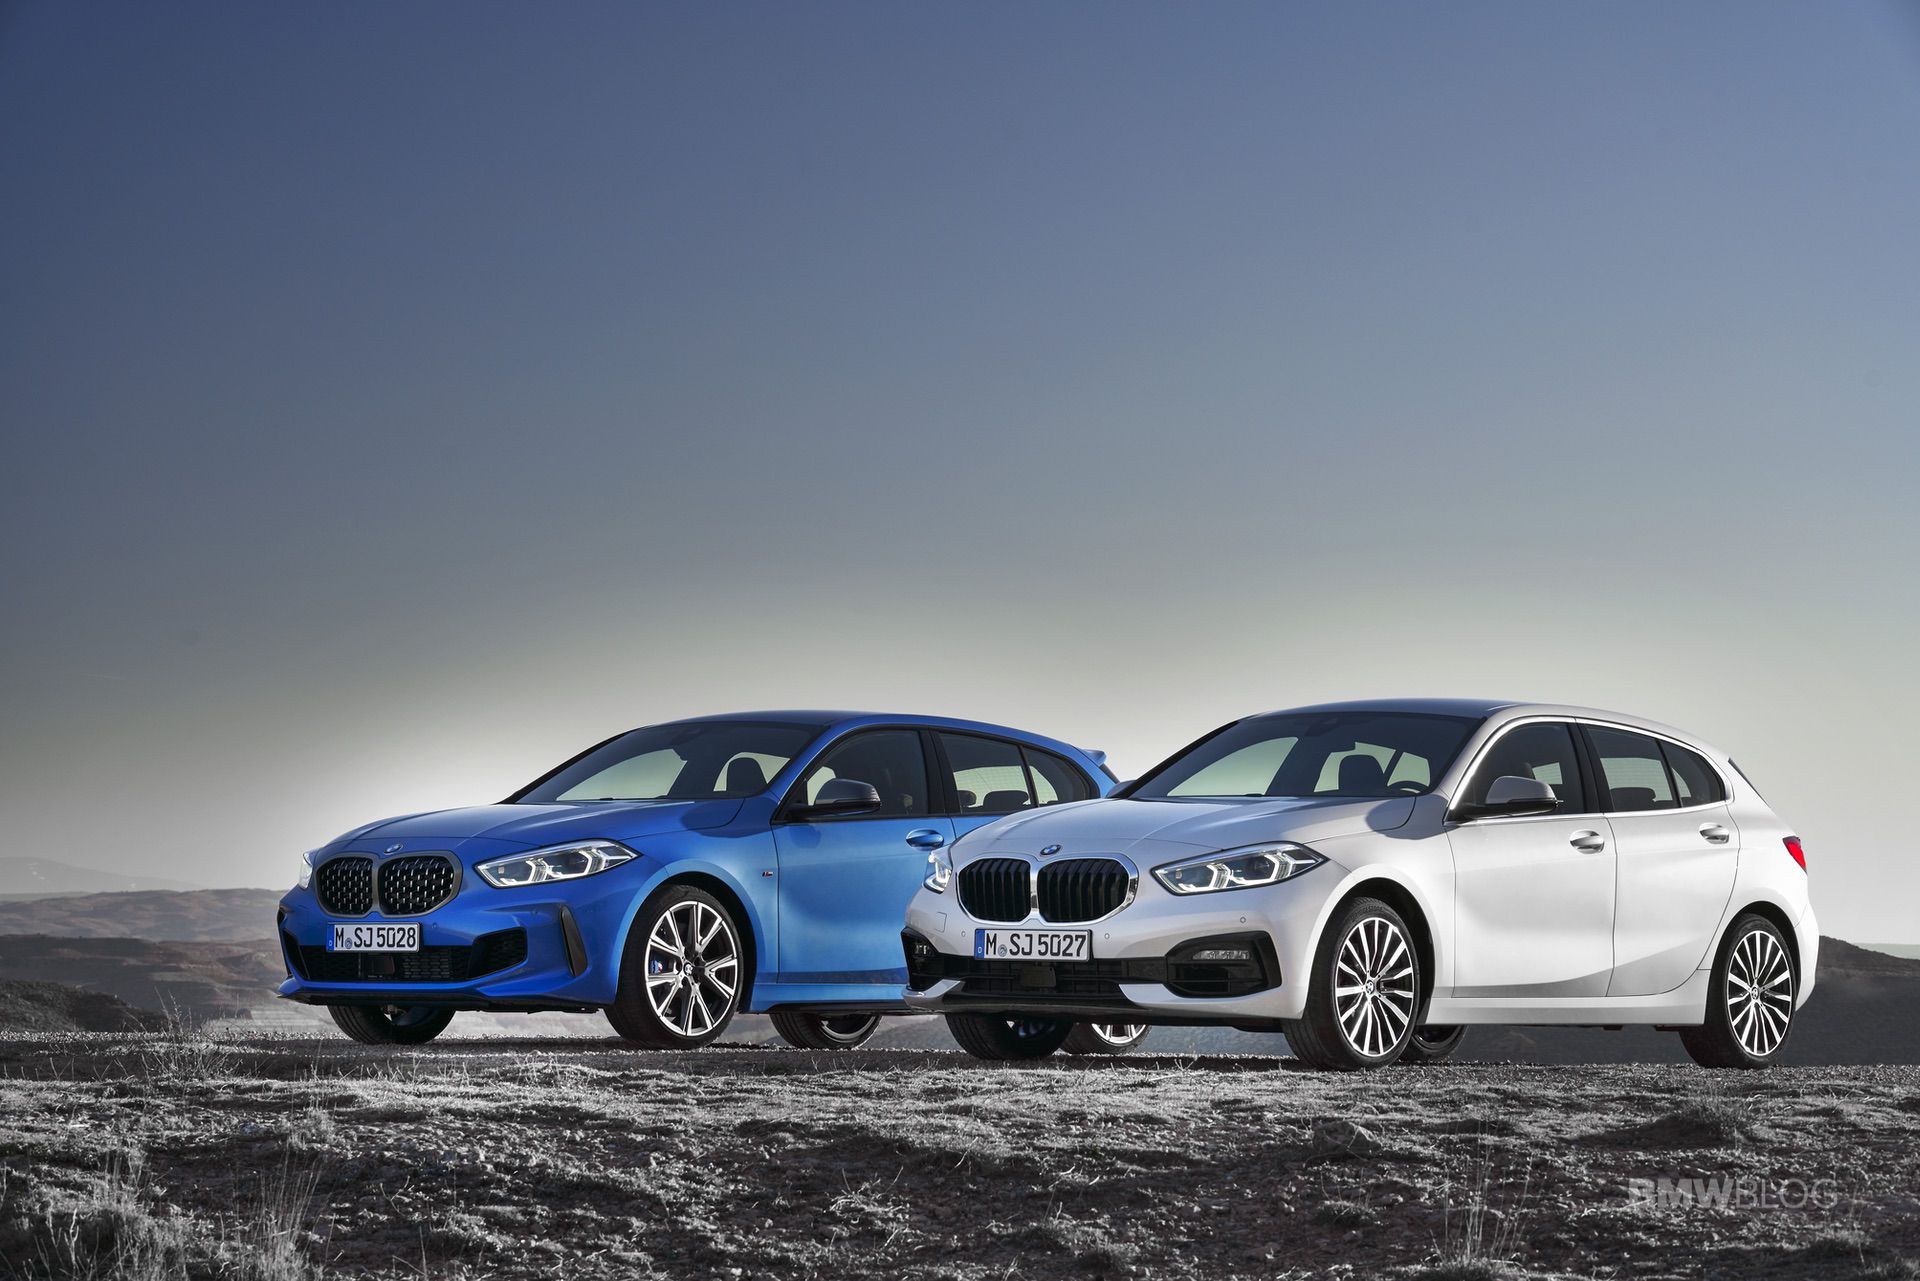 specs for bmw 1 series unveiled 116d and 118d models added to the range